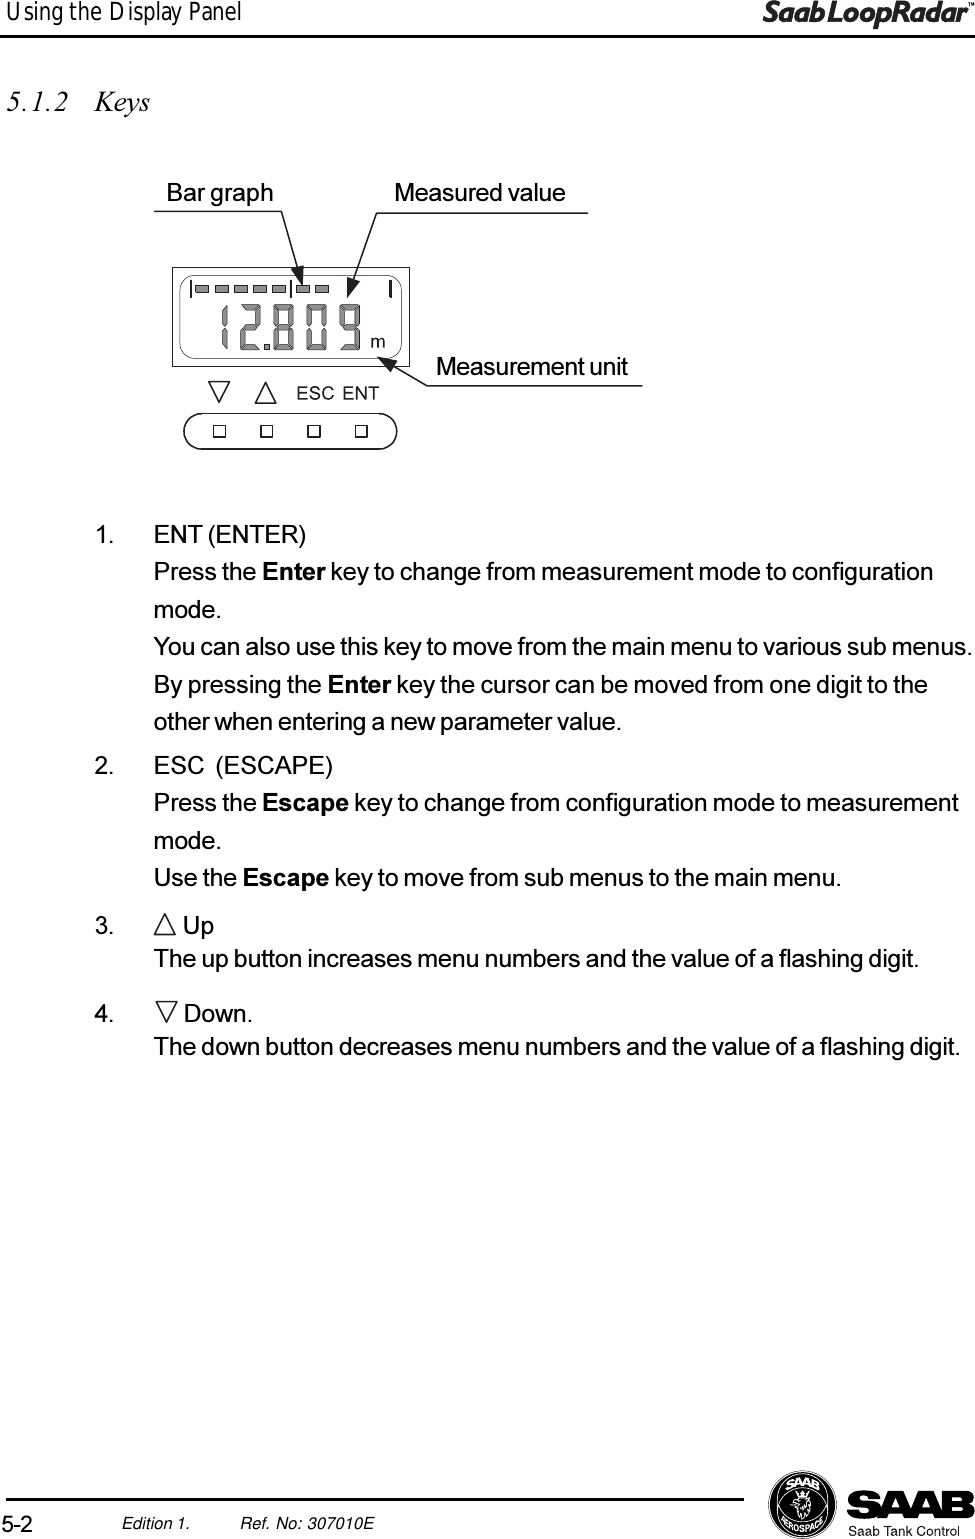 5-2Edition 1. Ref. No: 307010EUsing the Display Panel5.1.2 Keys1. ENT (ENTER)Press the Enter key to change from measurement mode to configurationmode.You can also use this key to move from the main menu to various sub menus.By pressing the Enter key the cursor can be moved from one digit to theother when entering a new parameter value.2. ESC (ESCAPE)Press the Escape key to change from configuration mode to measurementmode.Use the Escape key to move from sub menus to the main menu.3.  UpThe up button increases menu numbers and the value of a flashing digit.4.  Down.The down button decreases menu numbers and the value of a flashing digit.Measurement unitMeasured valueBar graph